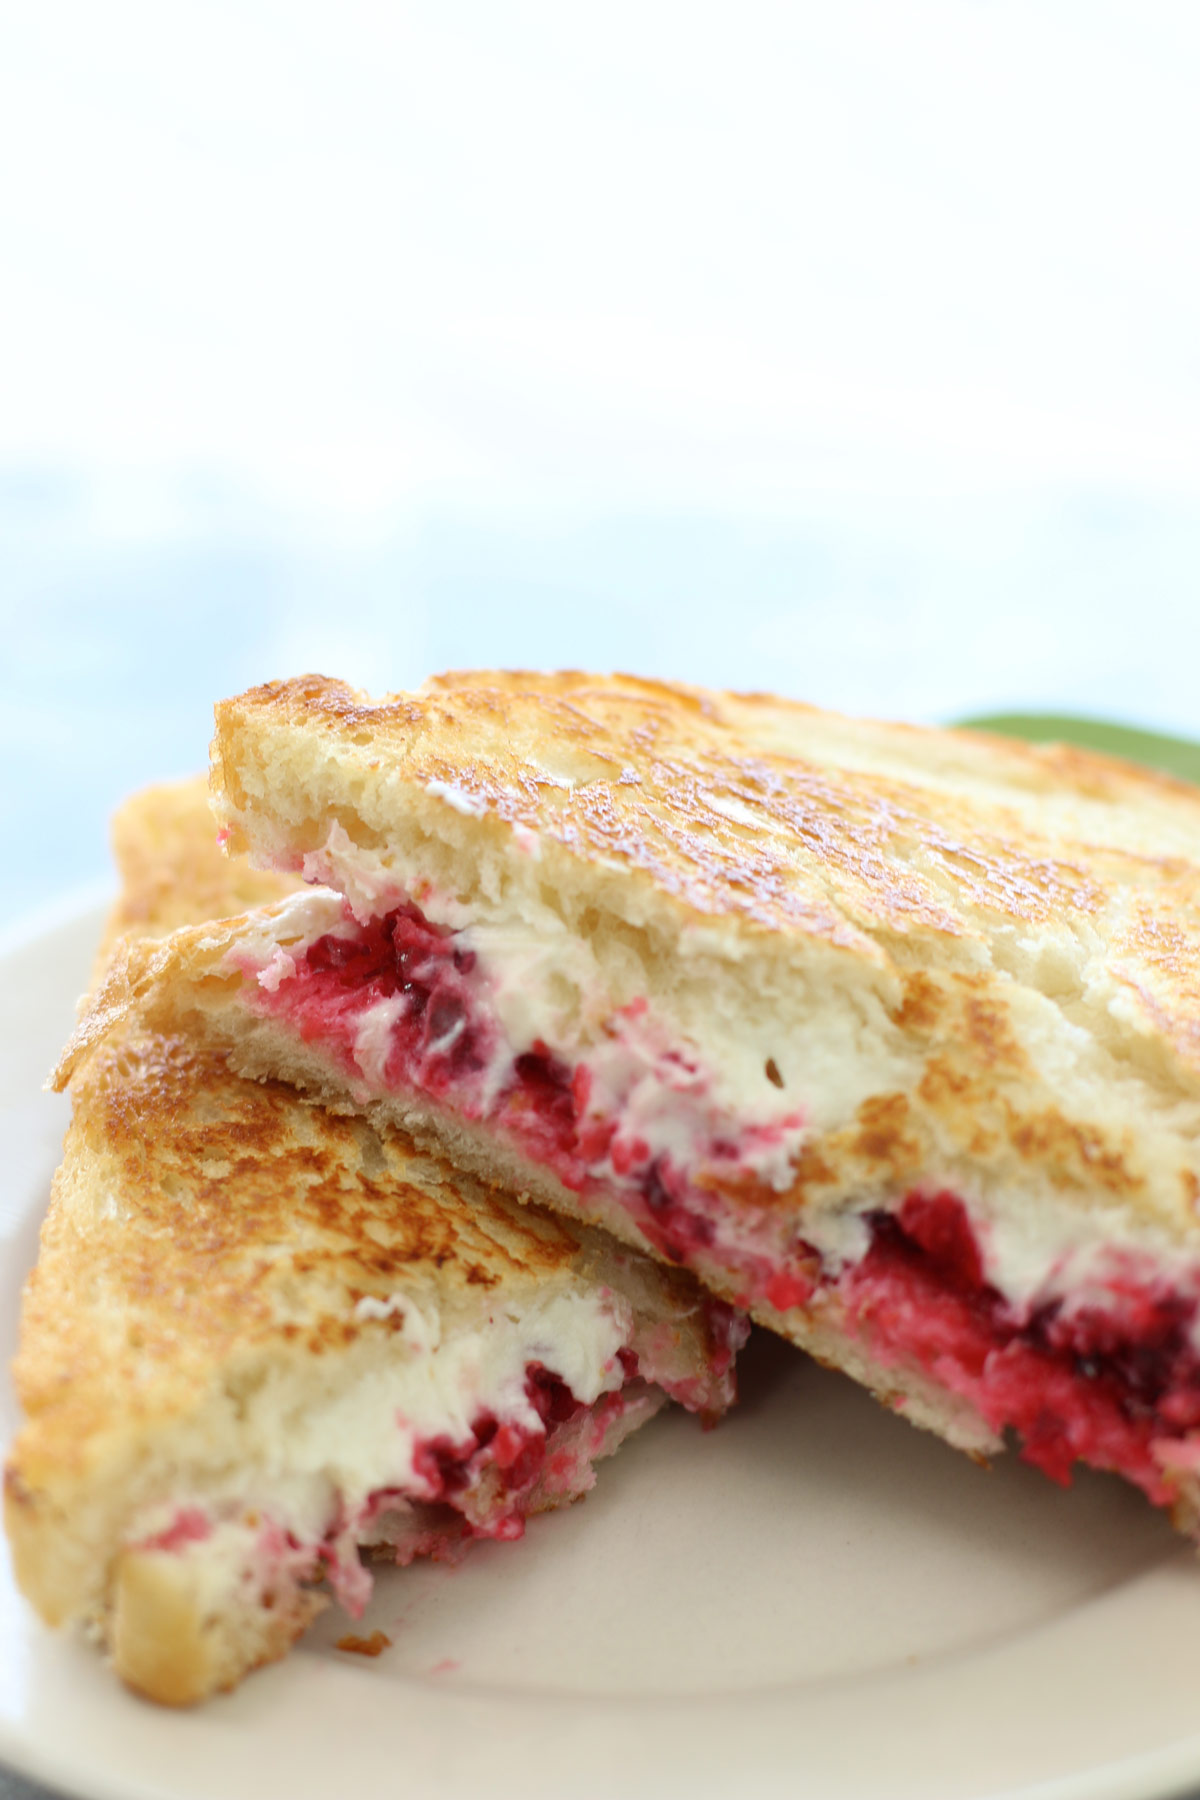 Grilled Goat Cheese and Cranberry Sandwich